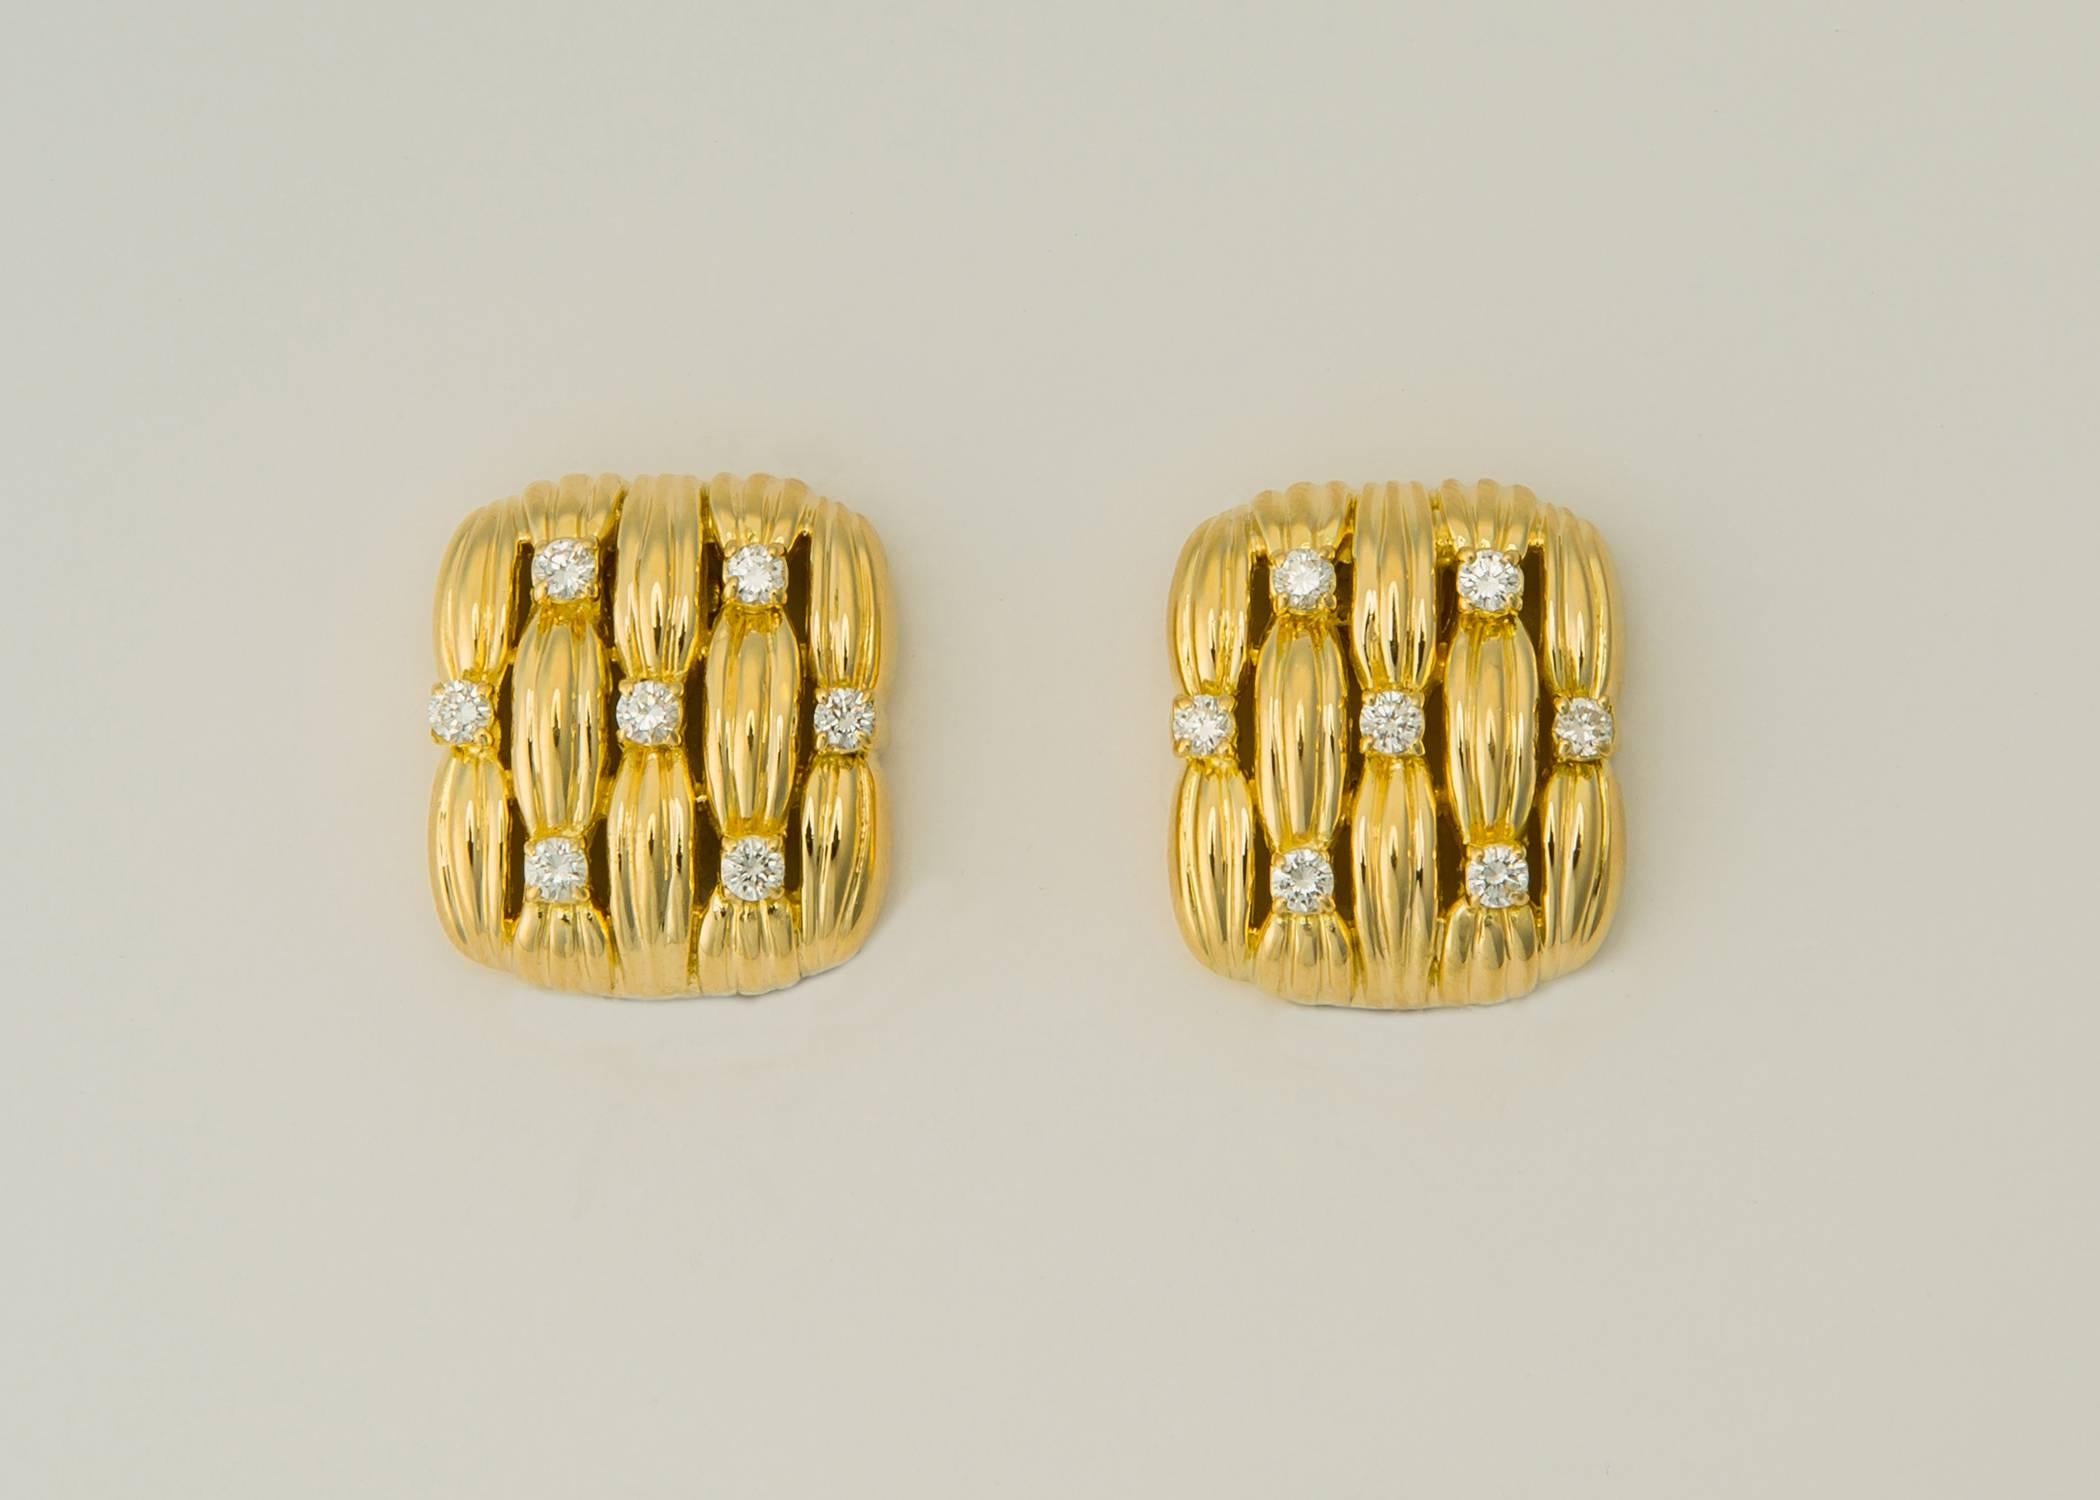 A Tiffany Classic. Woven gold with great detailing is accented with brilliant cut diamonds to create a chic timeless style. 14 diamonds total 1.40 carats. This earring measures 7/8's of an inch vertically and 3/4's of an inch across. Please view